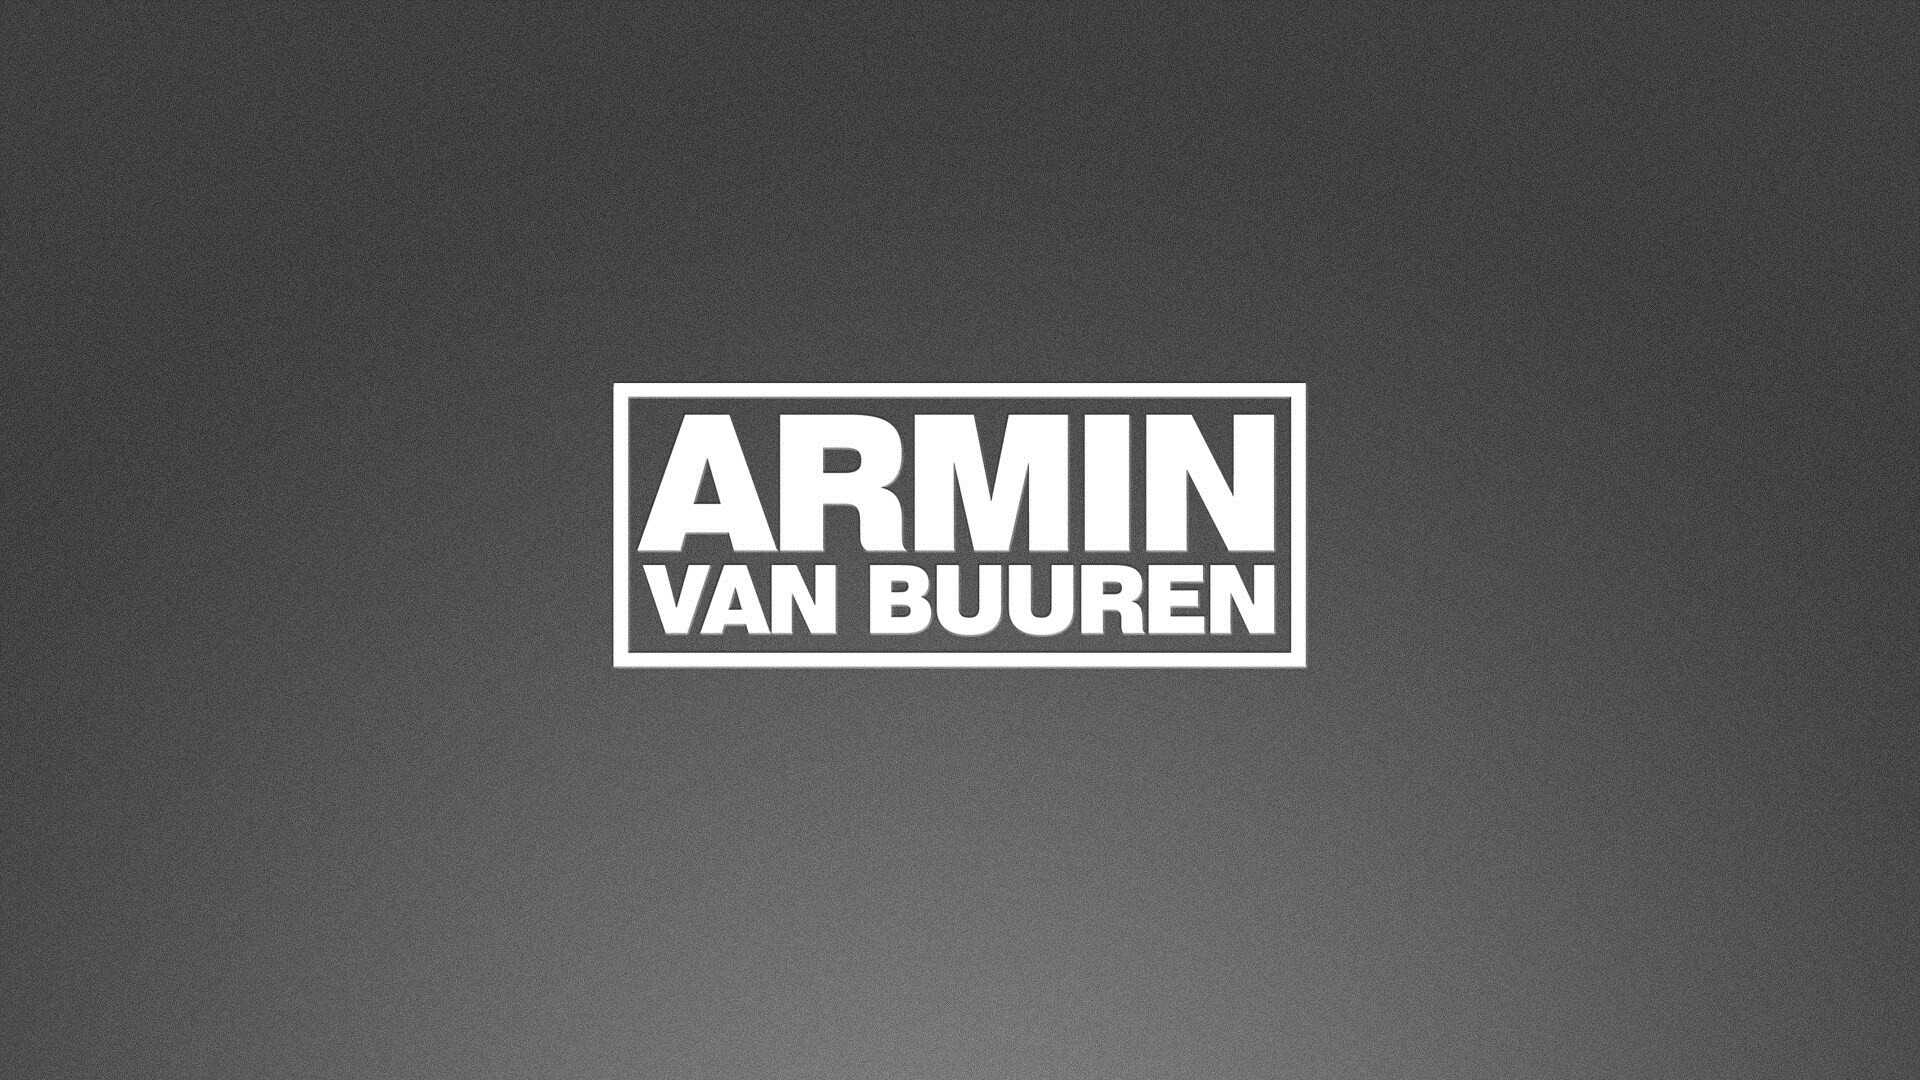 Armin Van Buuren: He was voted number one DJ in the 2009 DJ Mag for the third consecutive year. 1920x1080 Full HD Wallpaper.